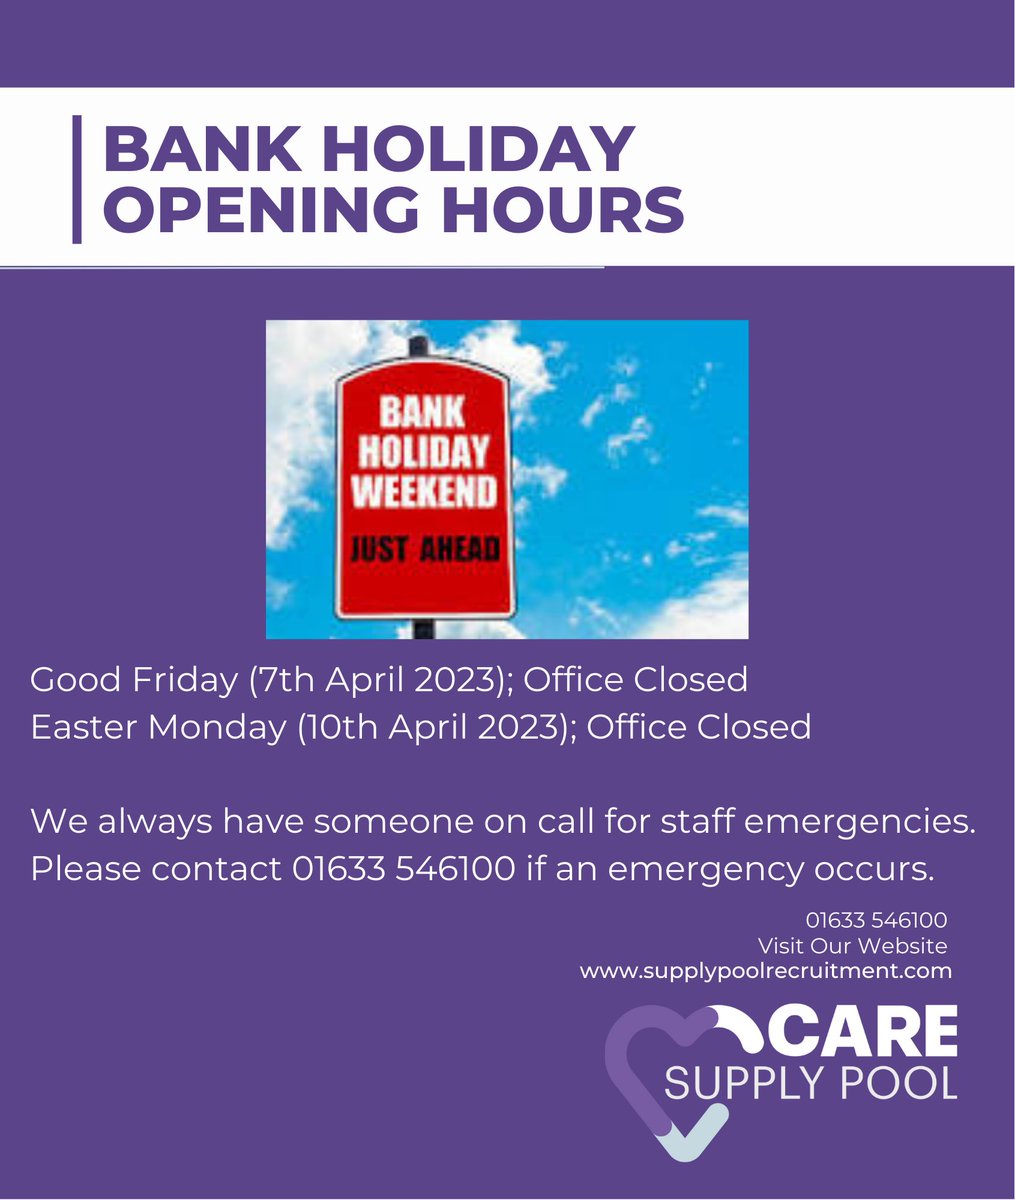 Bank holiday opening hours this Easter weekend. 

#easter #easterweekend #Easter2023 #newport #newportwales #WALES